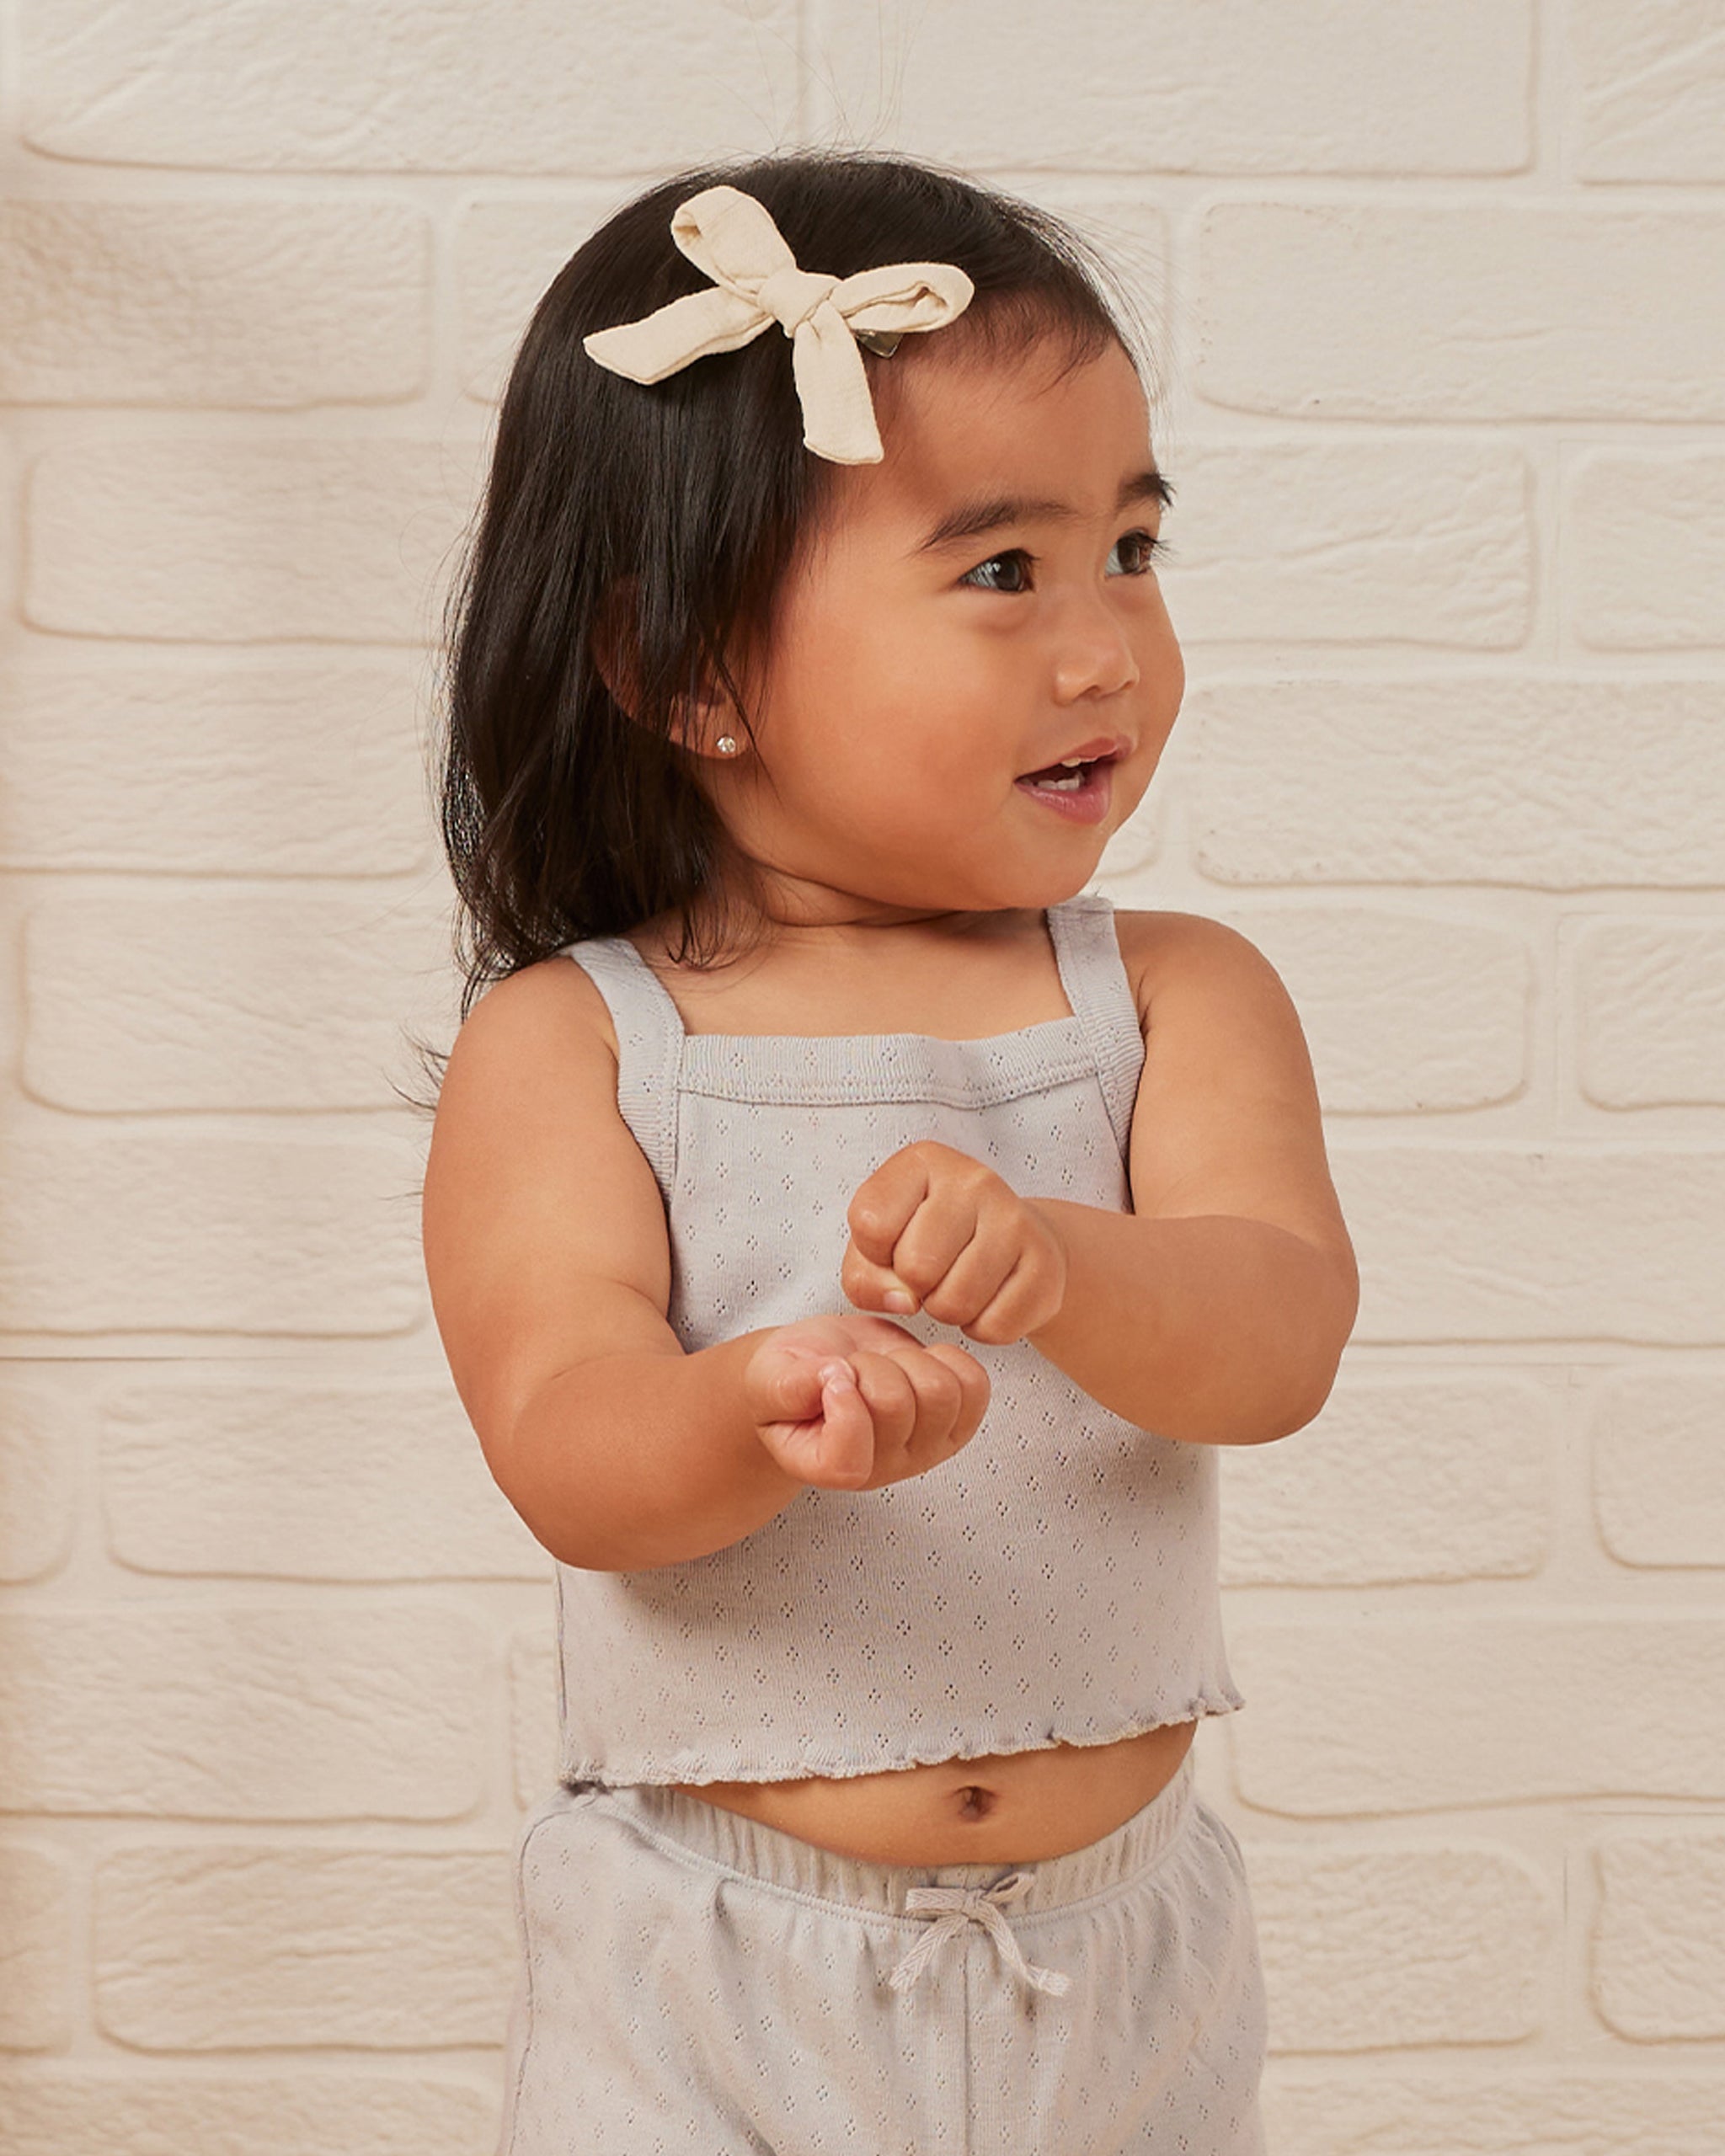 Pointelle Tank + Shortie Set || Cloud - Rylee + Cru | Kids Clothes | Trendy Baby Clothes | Modern Infant Outfits |